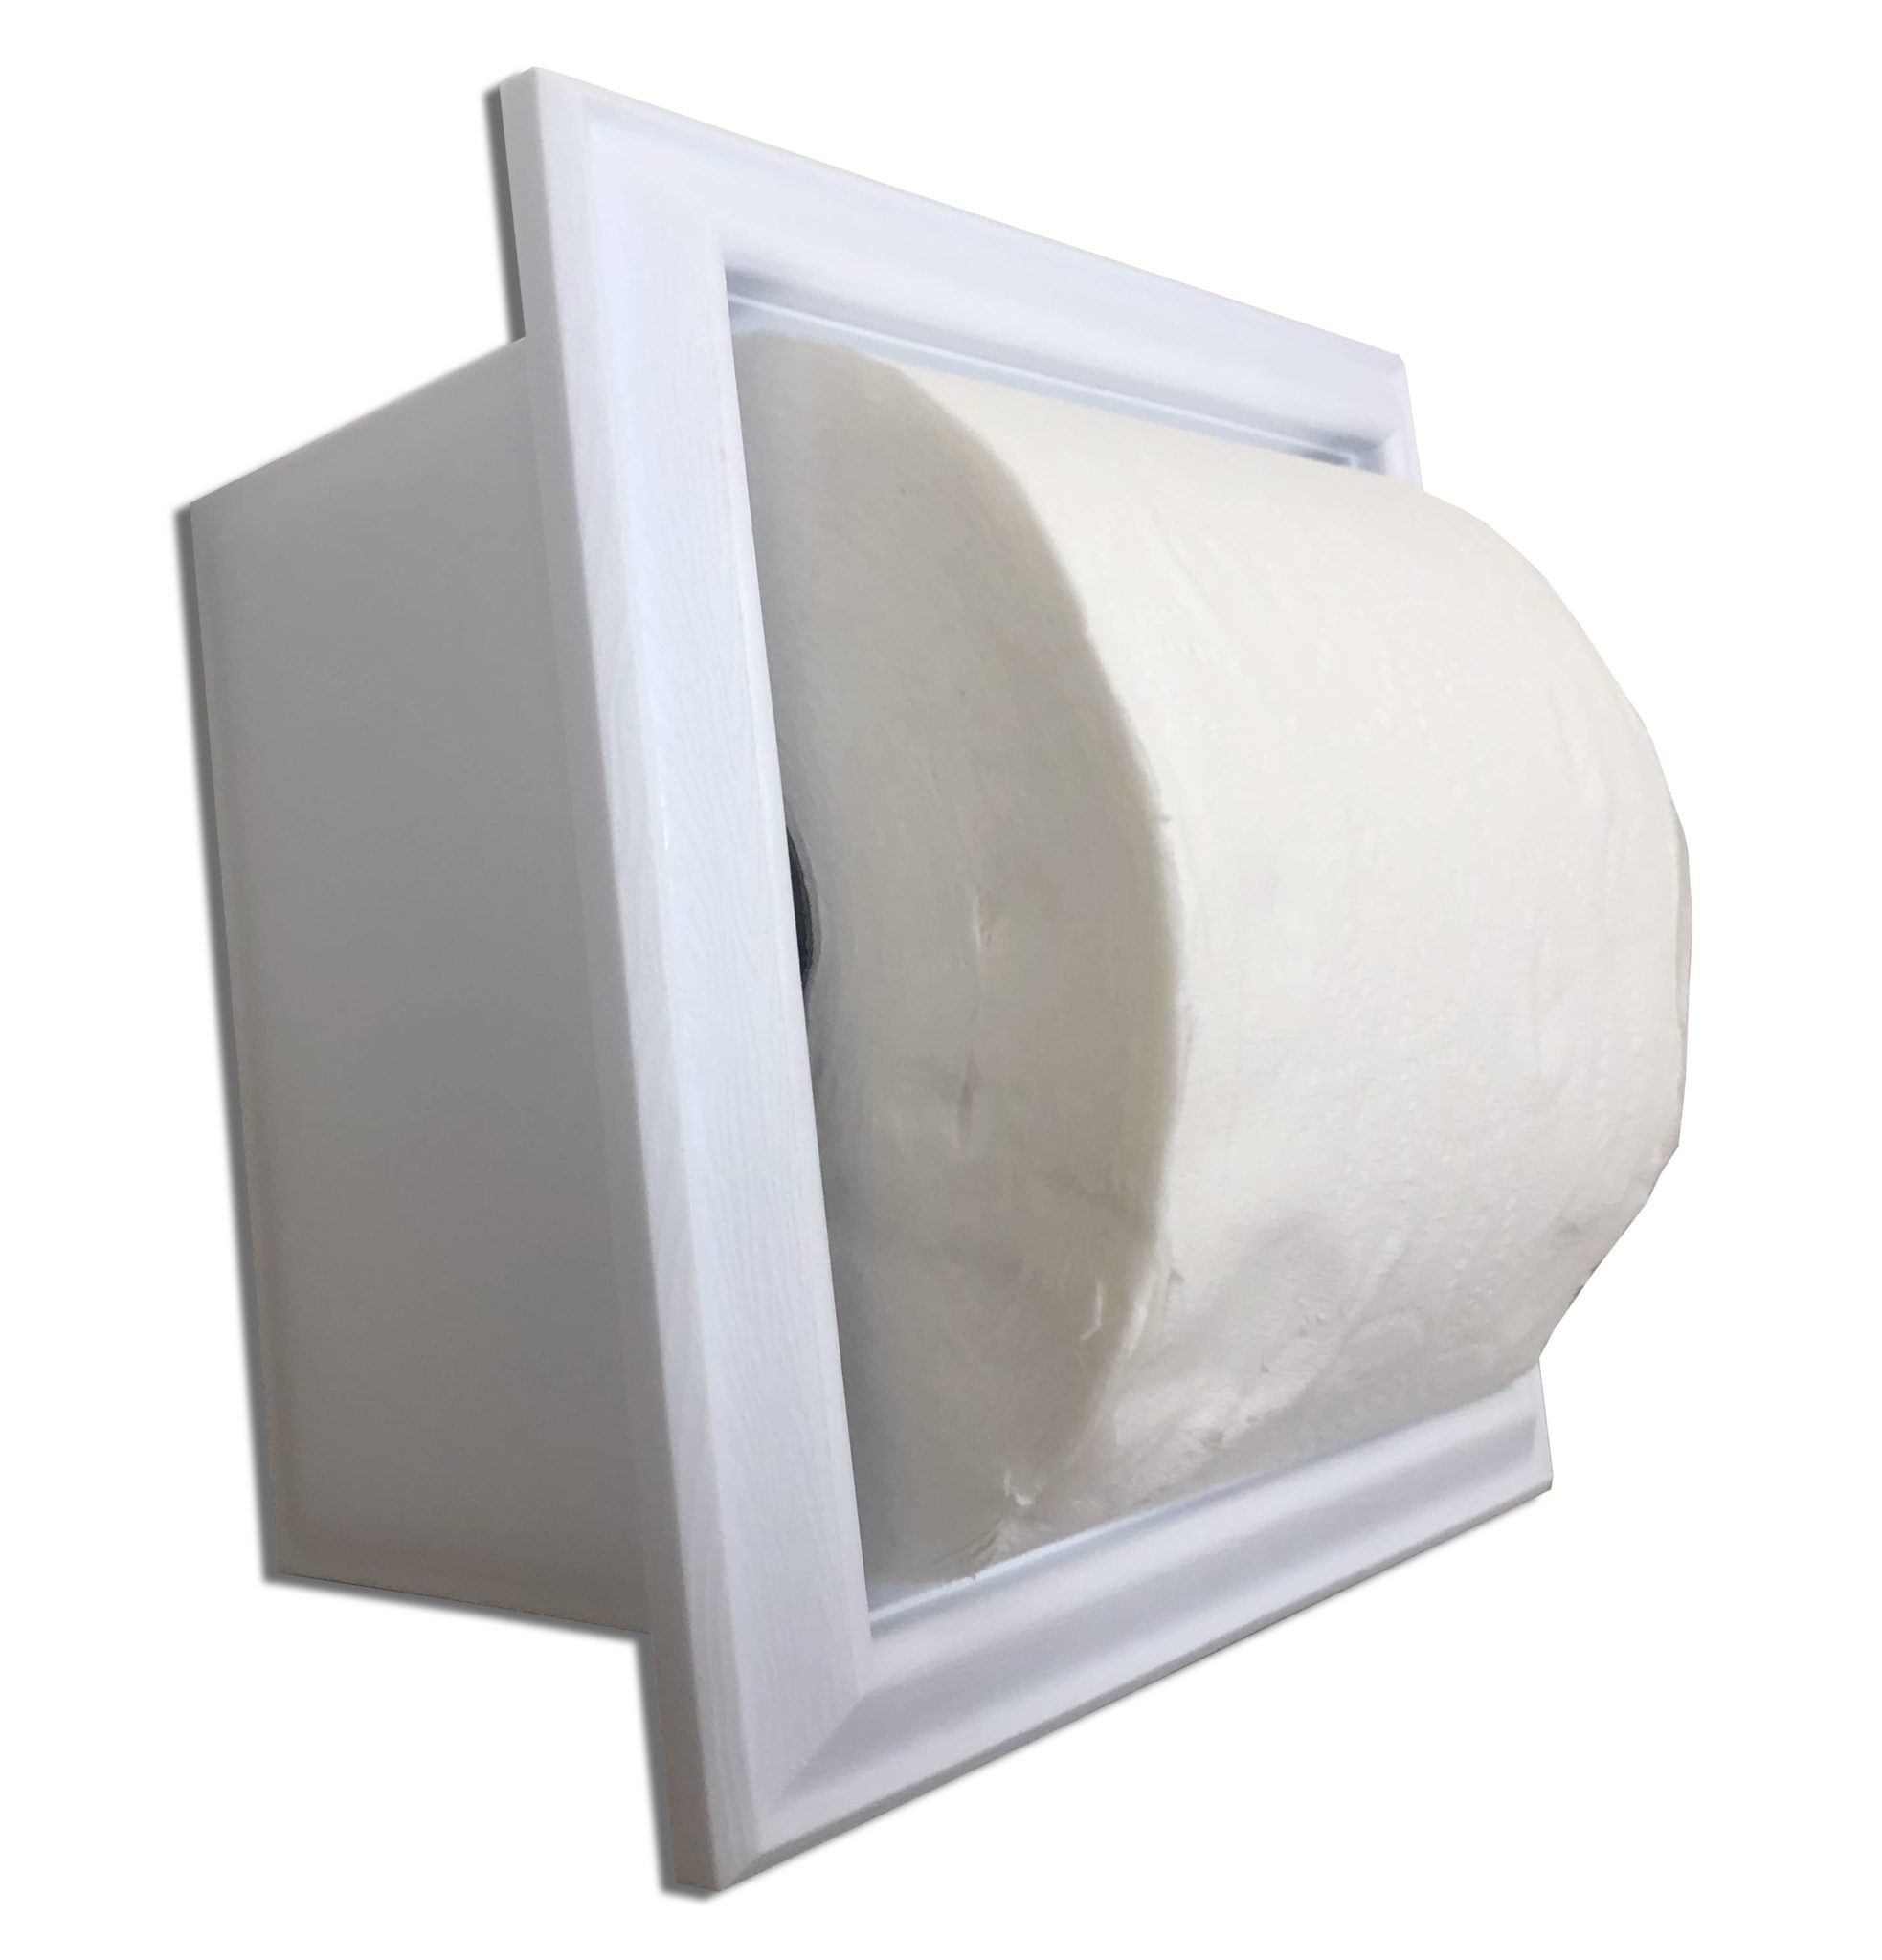 Rebel-7 recessed in wall plastic toilet paper holder - 5.5 x 5.5